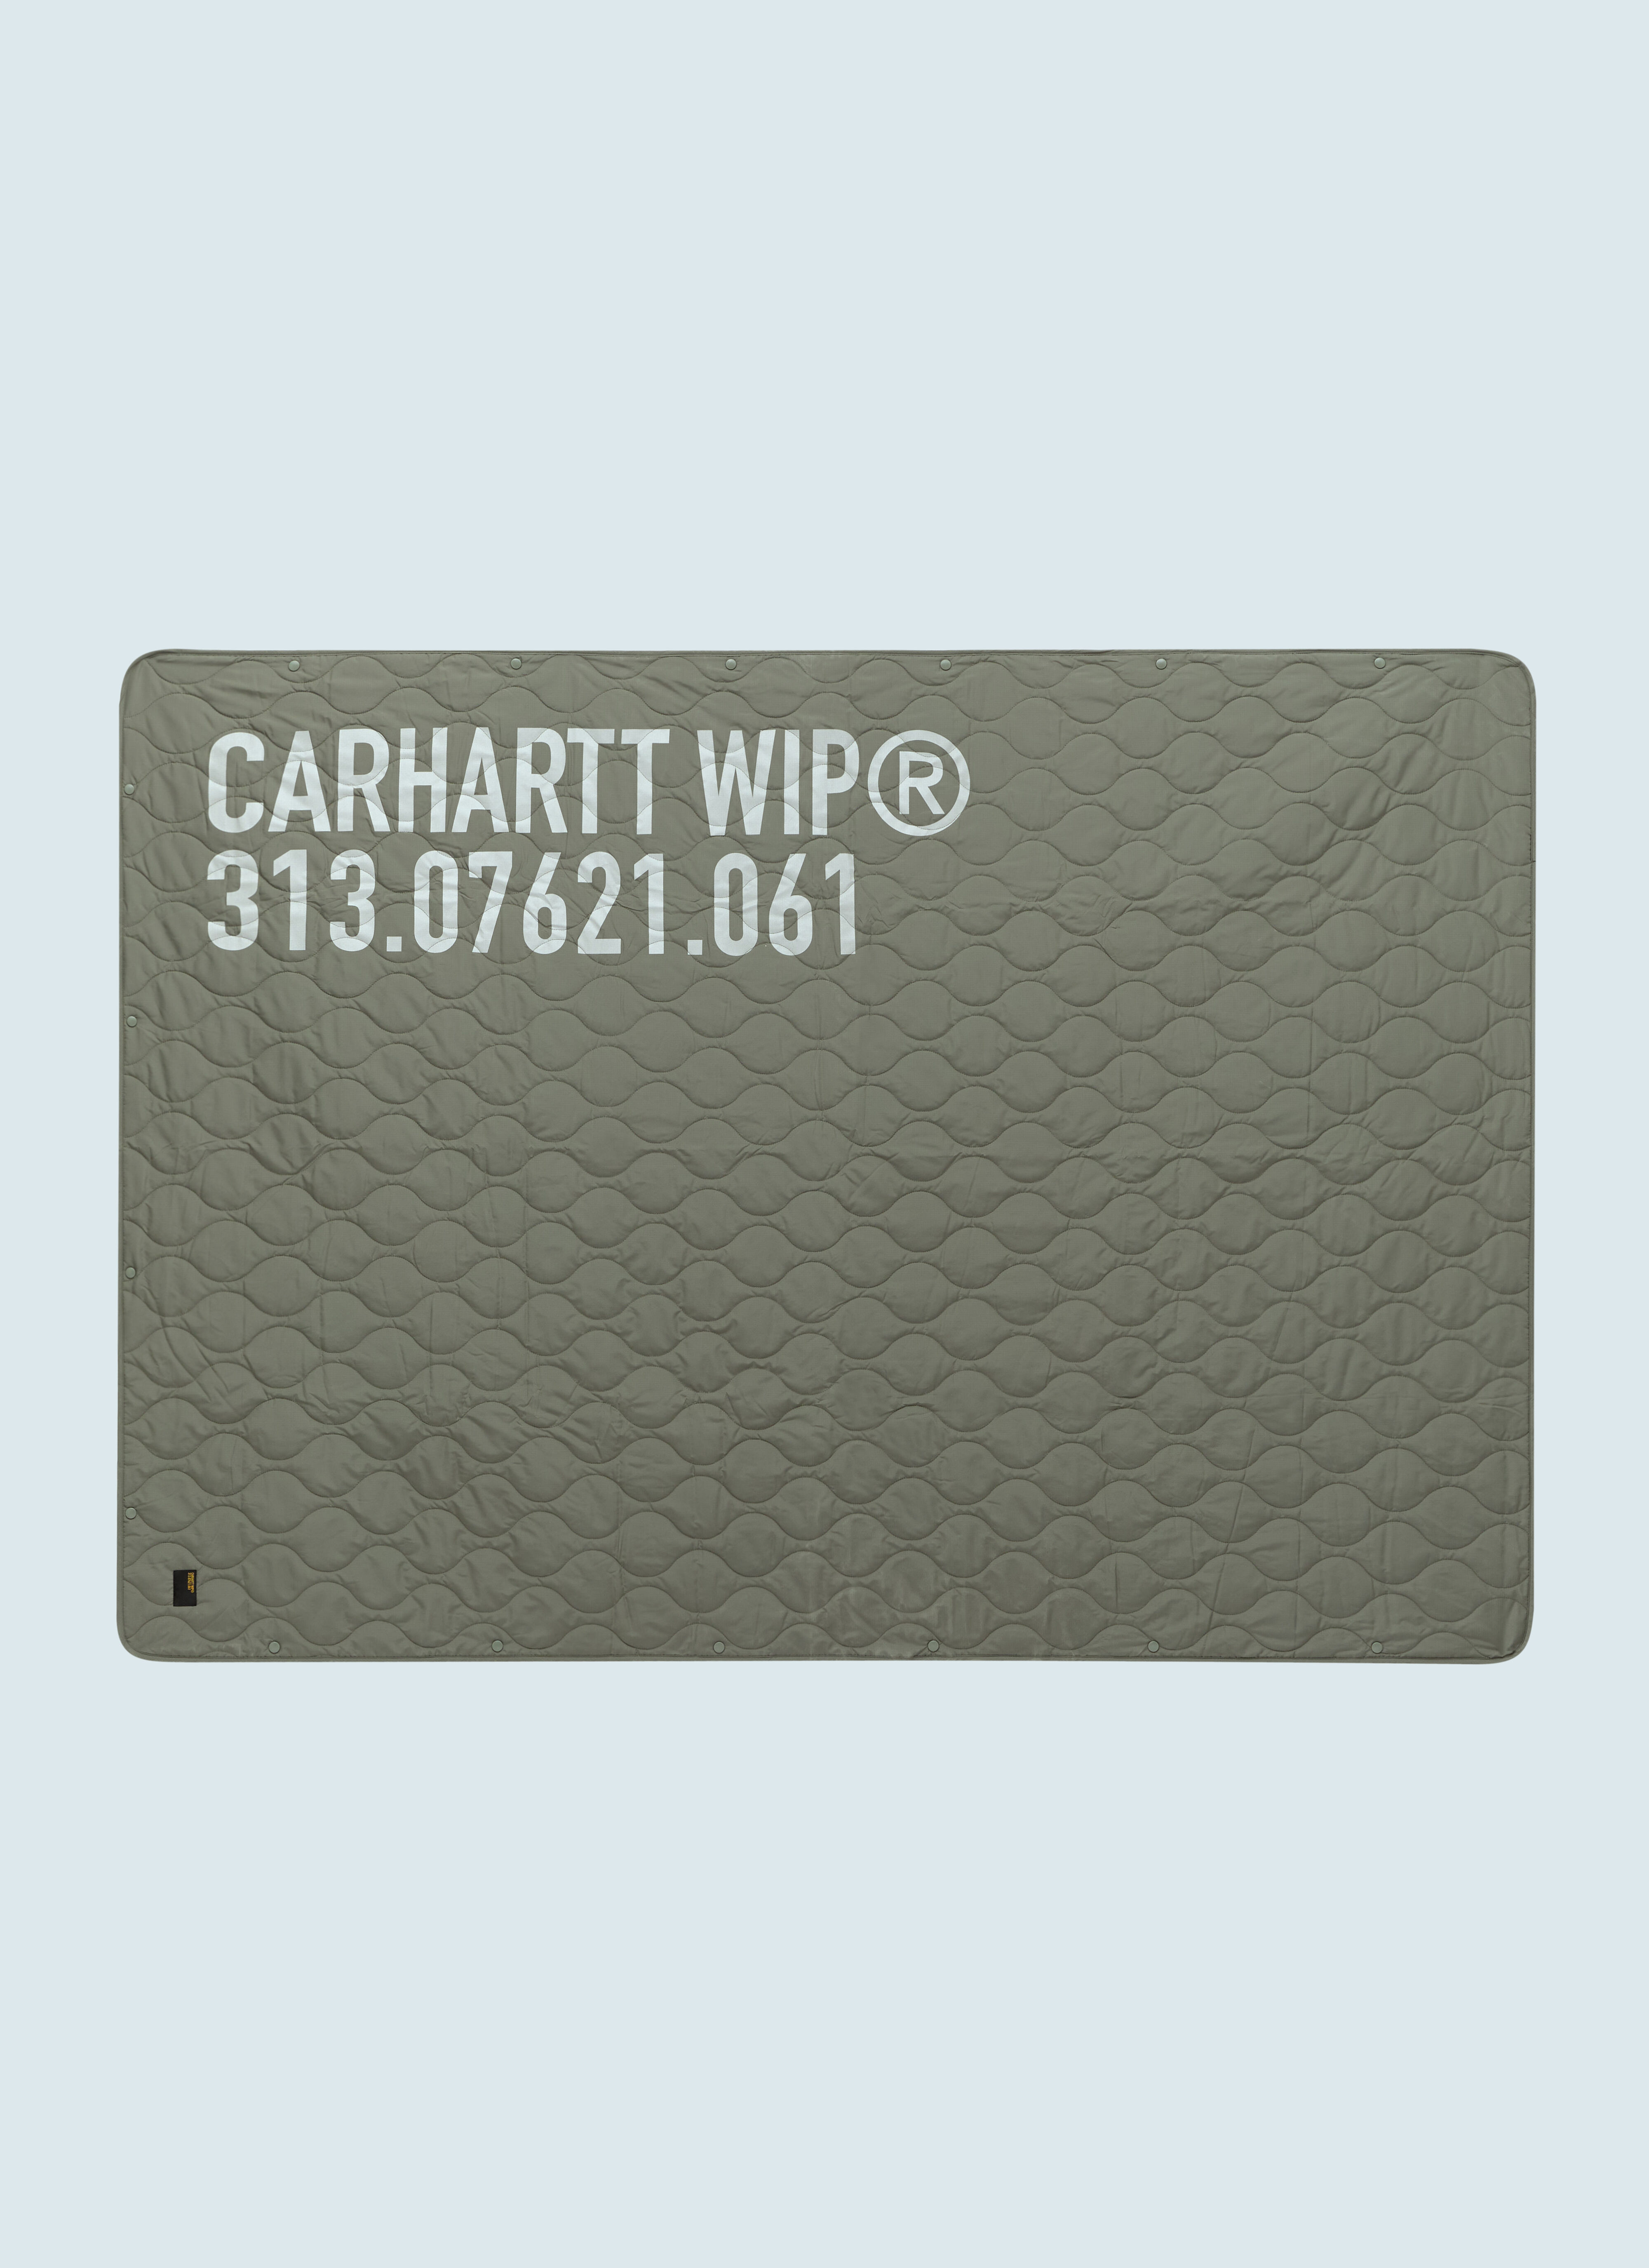 Carhartt WIP Tour Quilted Blanket White wip0156011